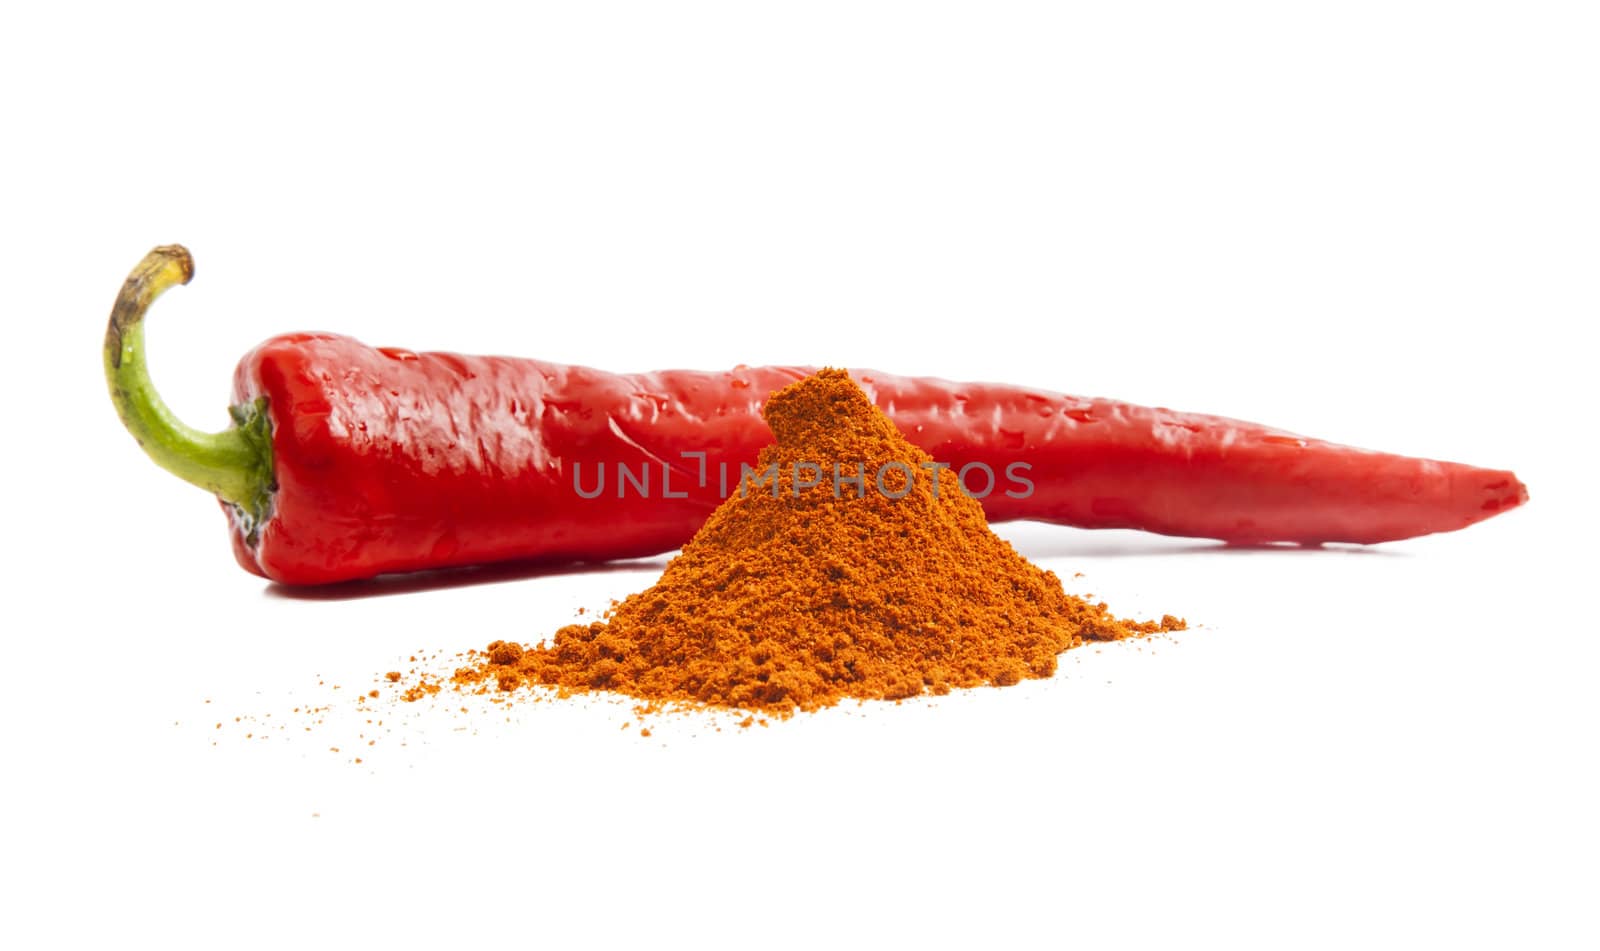 Red chili pepper and pile of red pepper spice by RawGroup